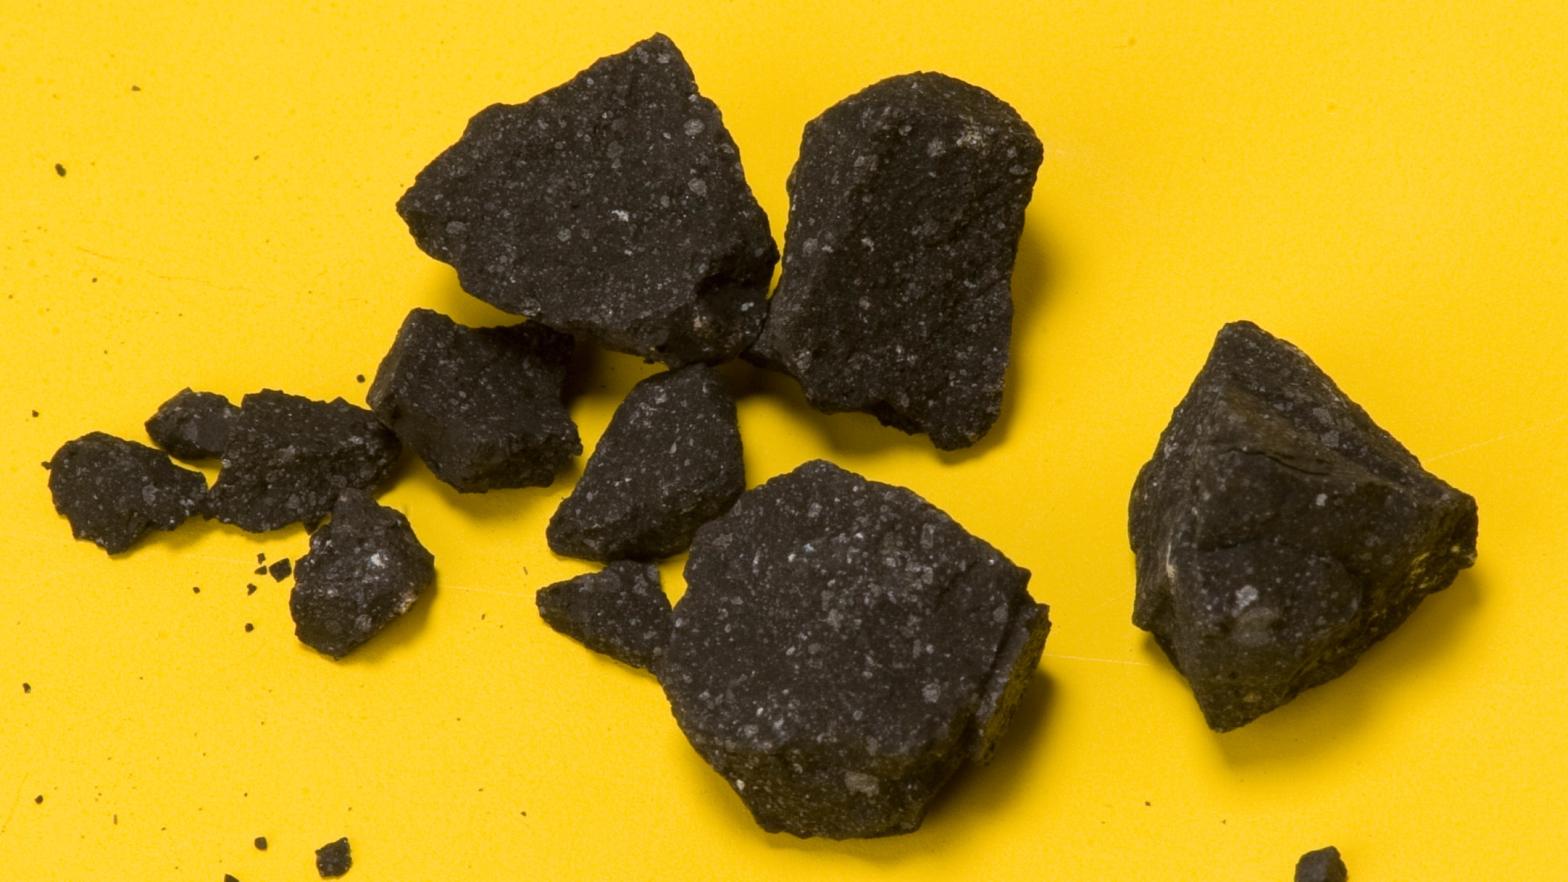 Fragments of the Sutter's Mill meteorite. (Image: Wikimedia Commons, Fair Use)